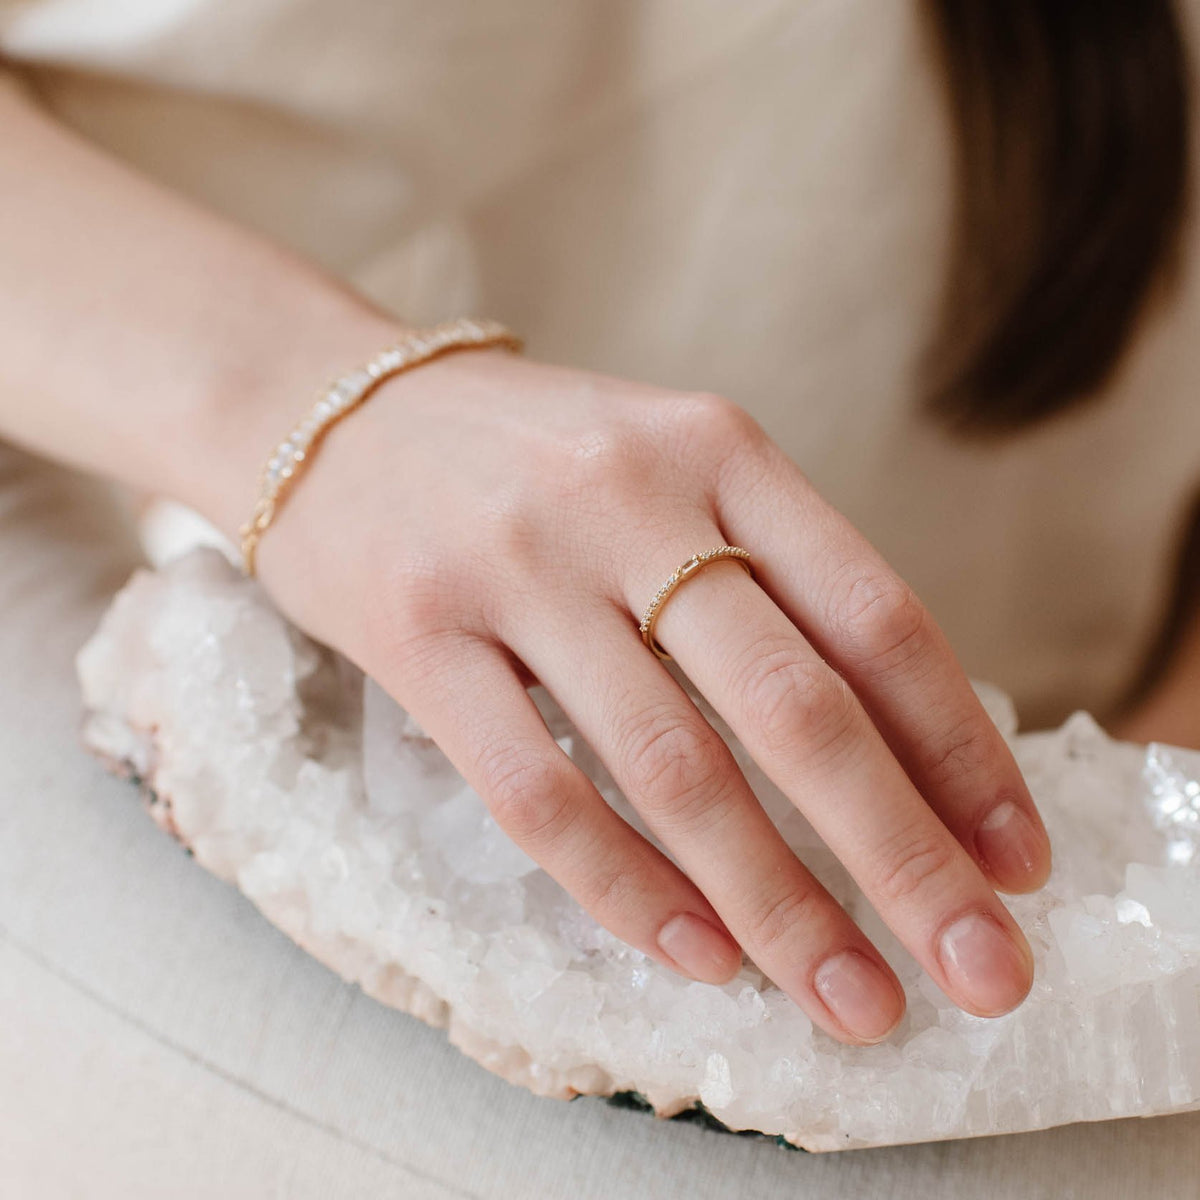 Loyal Prism Stacking Ring - White Topaz &amp; Gold - SO PRETTY CARA COTTER